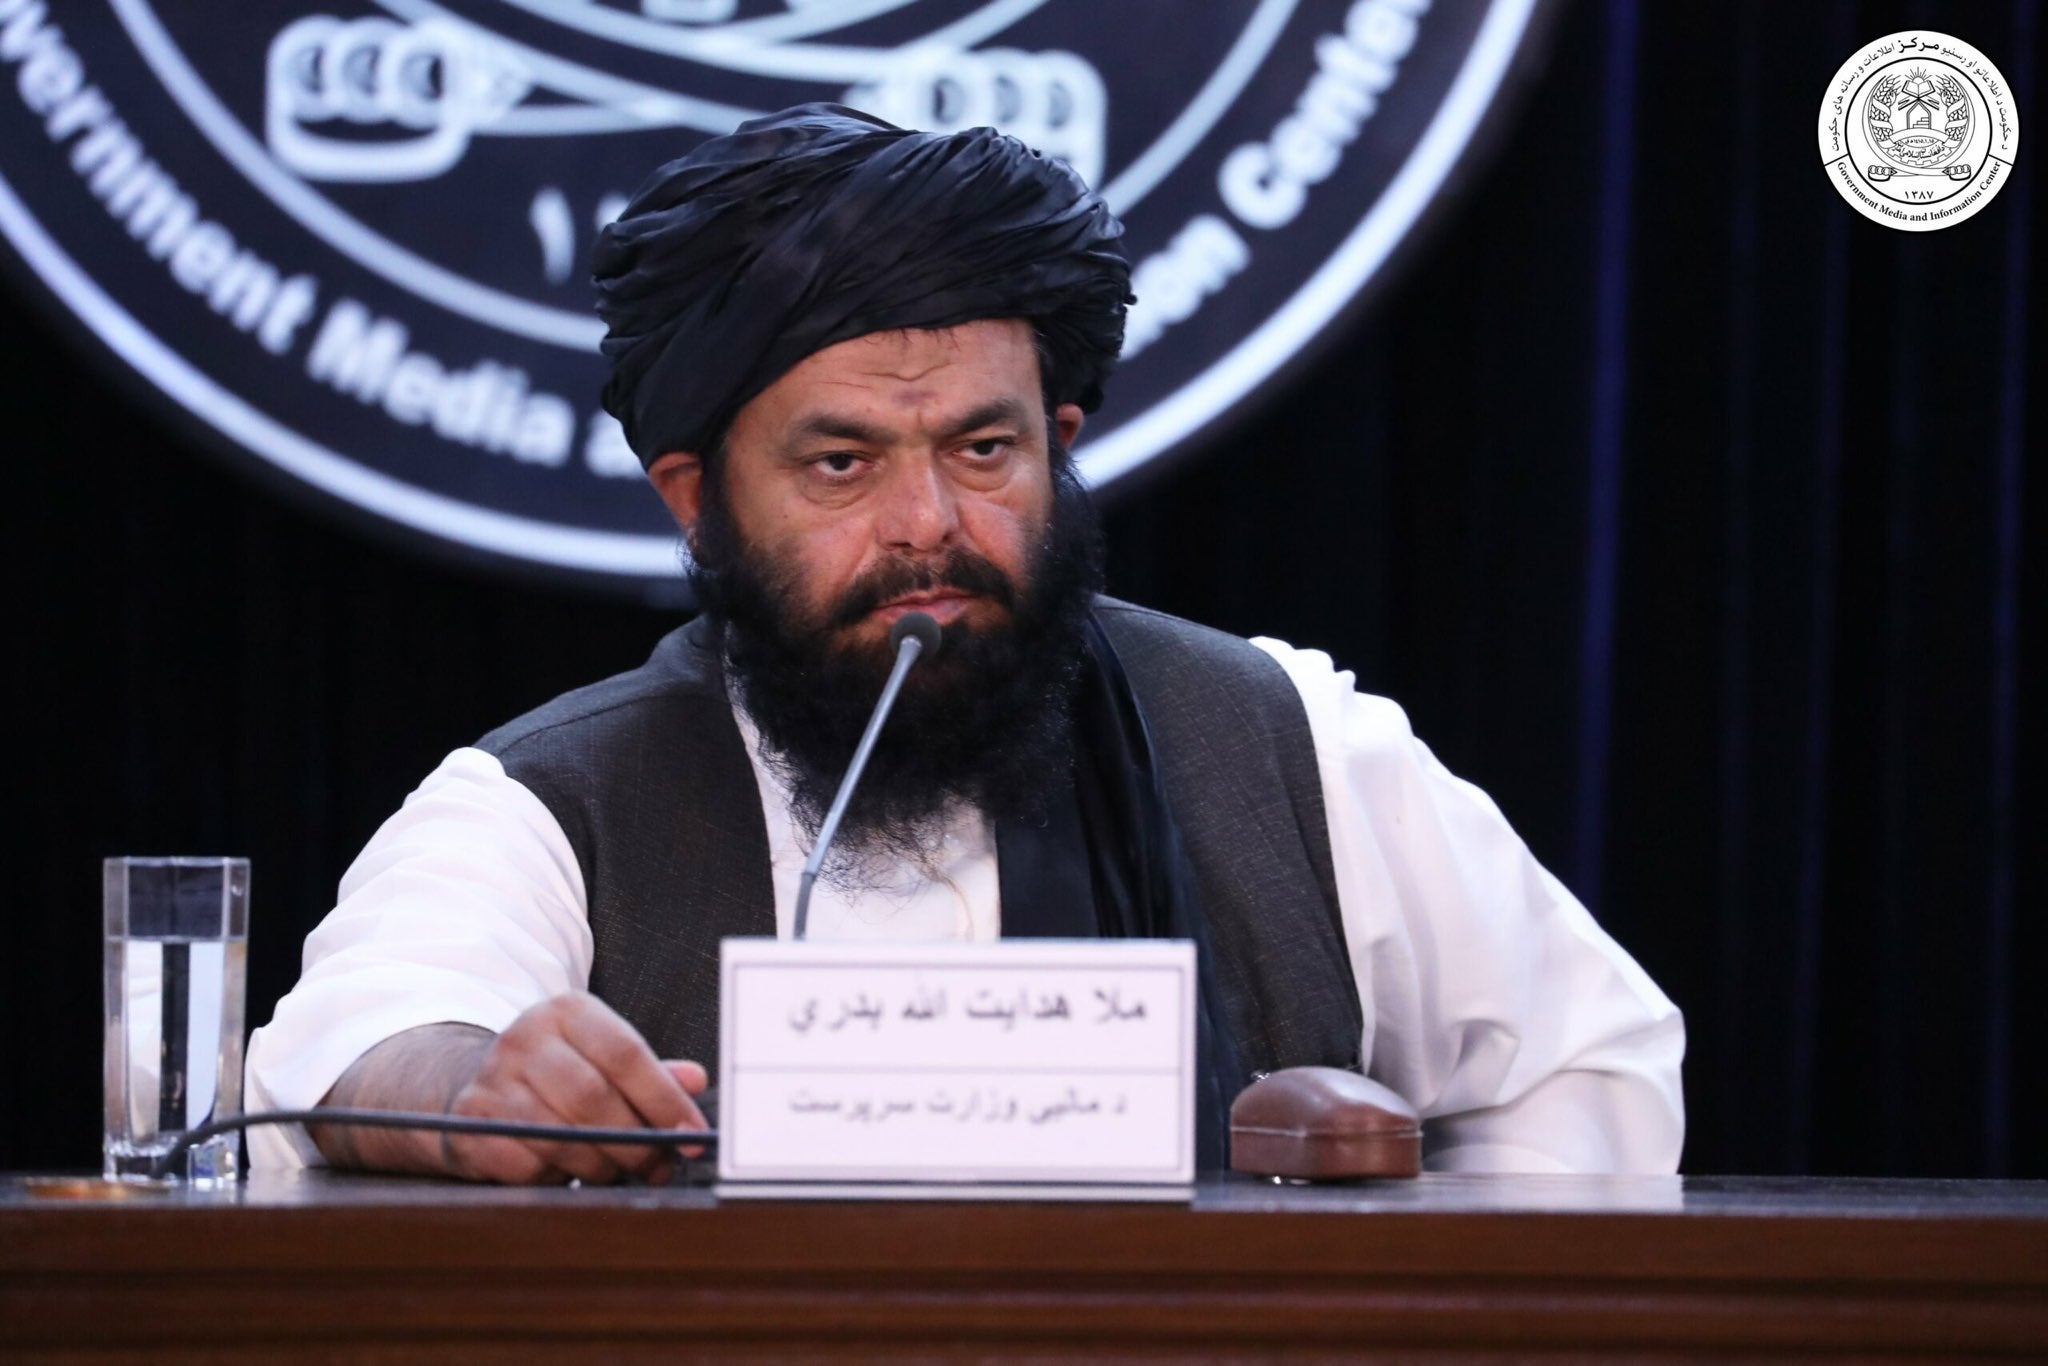 Mullah Badri, also known as Gul Agha, has been accused of collecting money for suicide attacks in Afghanistan’s Kandahar and distributing funds among the Taliban fighters and their families